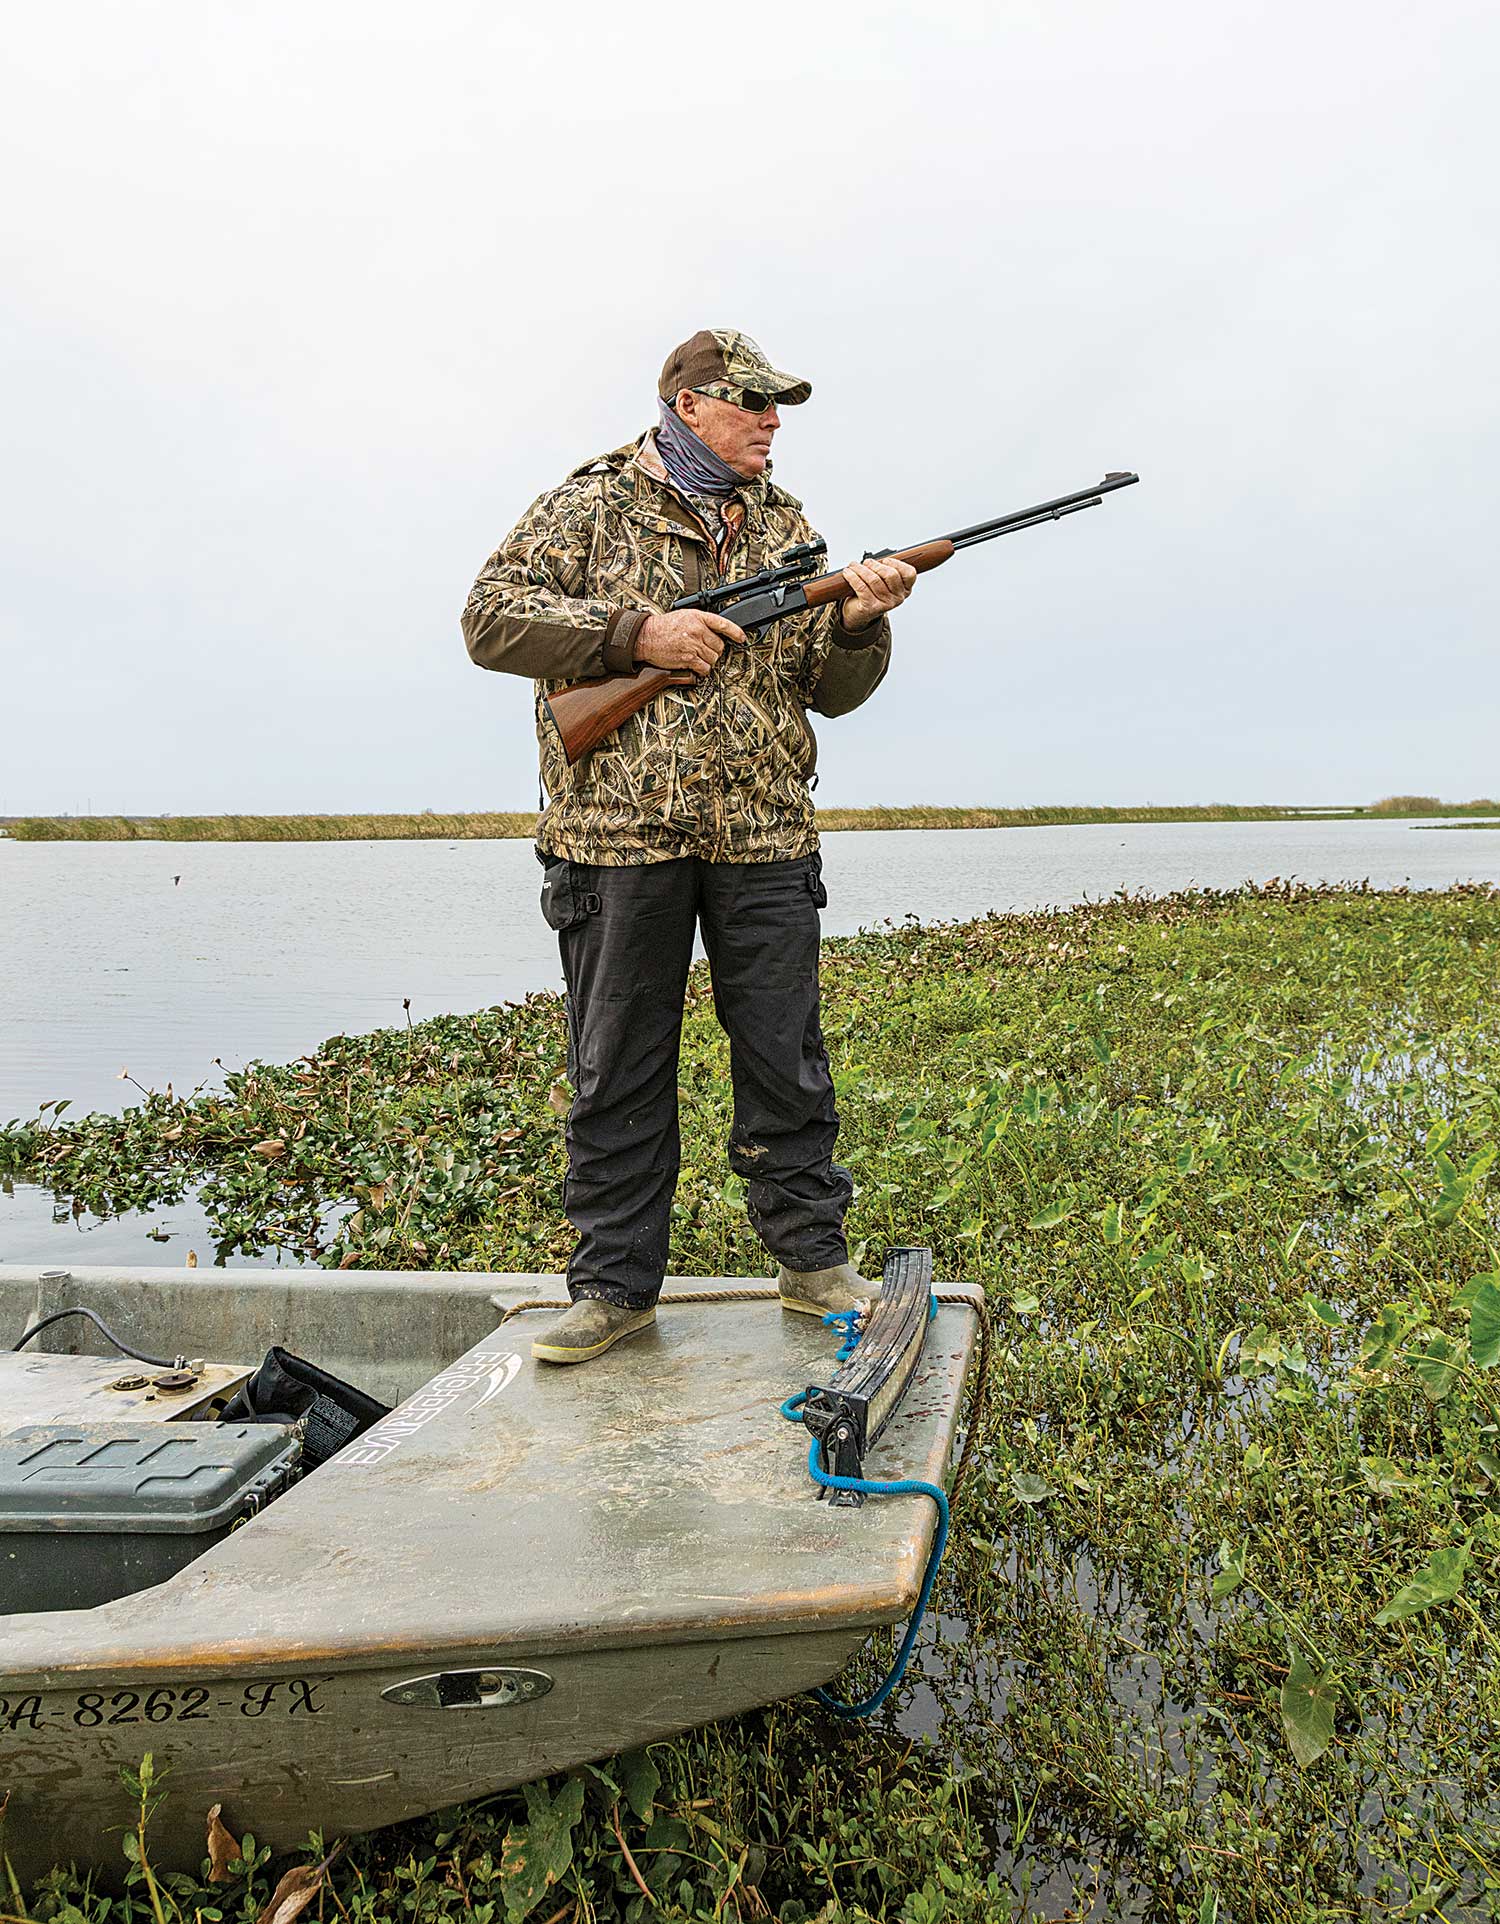 hunter holding rifle stands on boat stern in marshy area